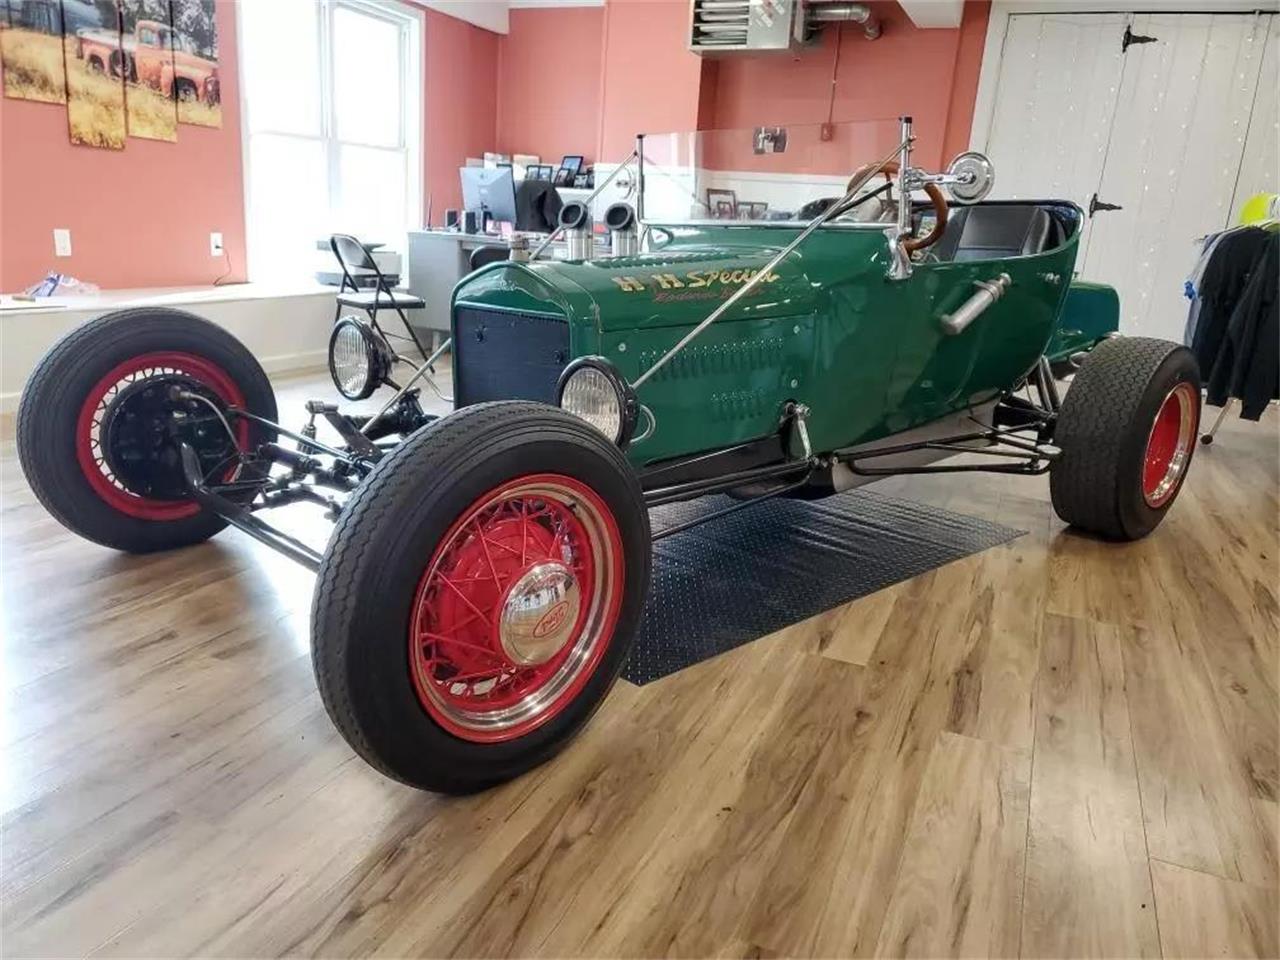 For Sale: 1923 Ford T Bucket in Fair Haven, Vermont for sale in Fair Haven, VT